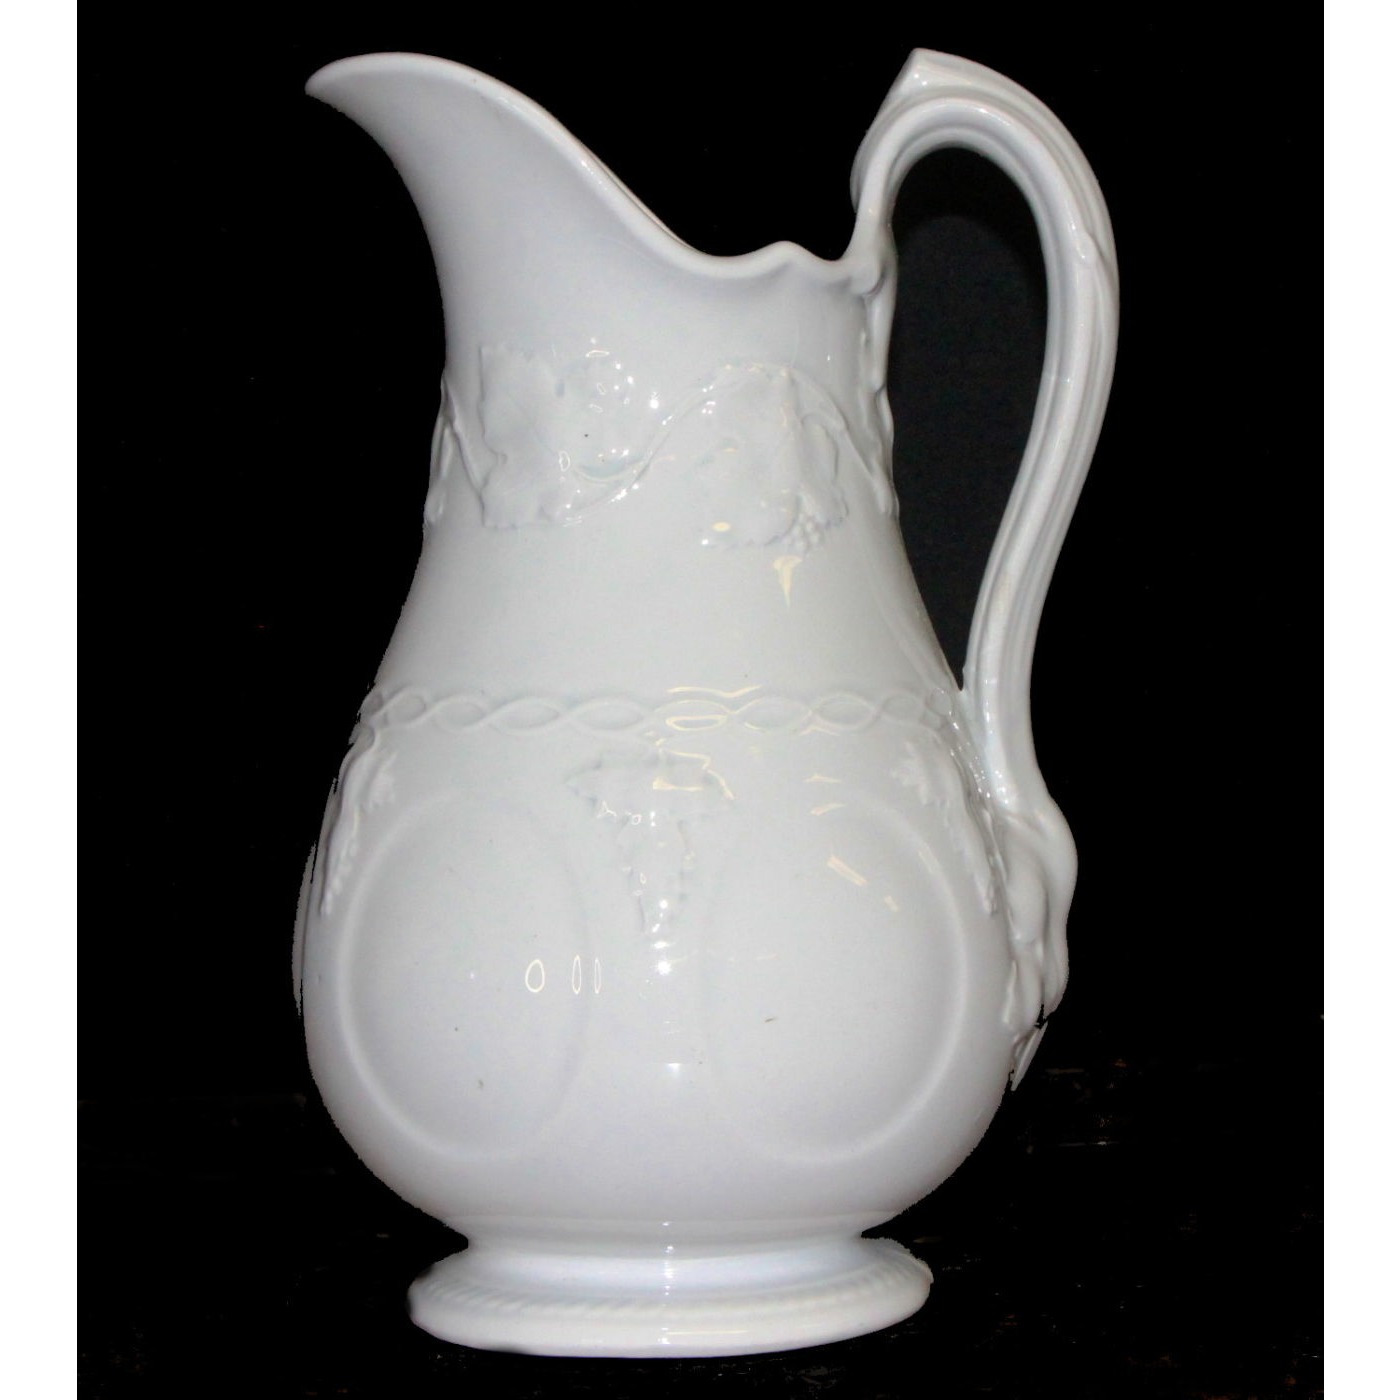 Lovely Tall Ironstone Ewer Pitcher - Vintage Shape